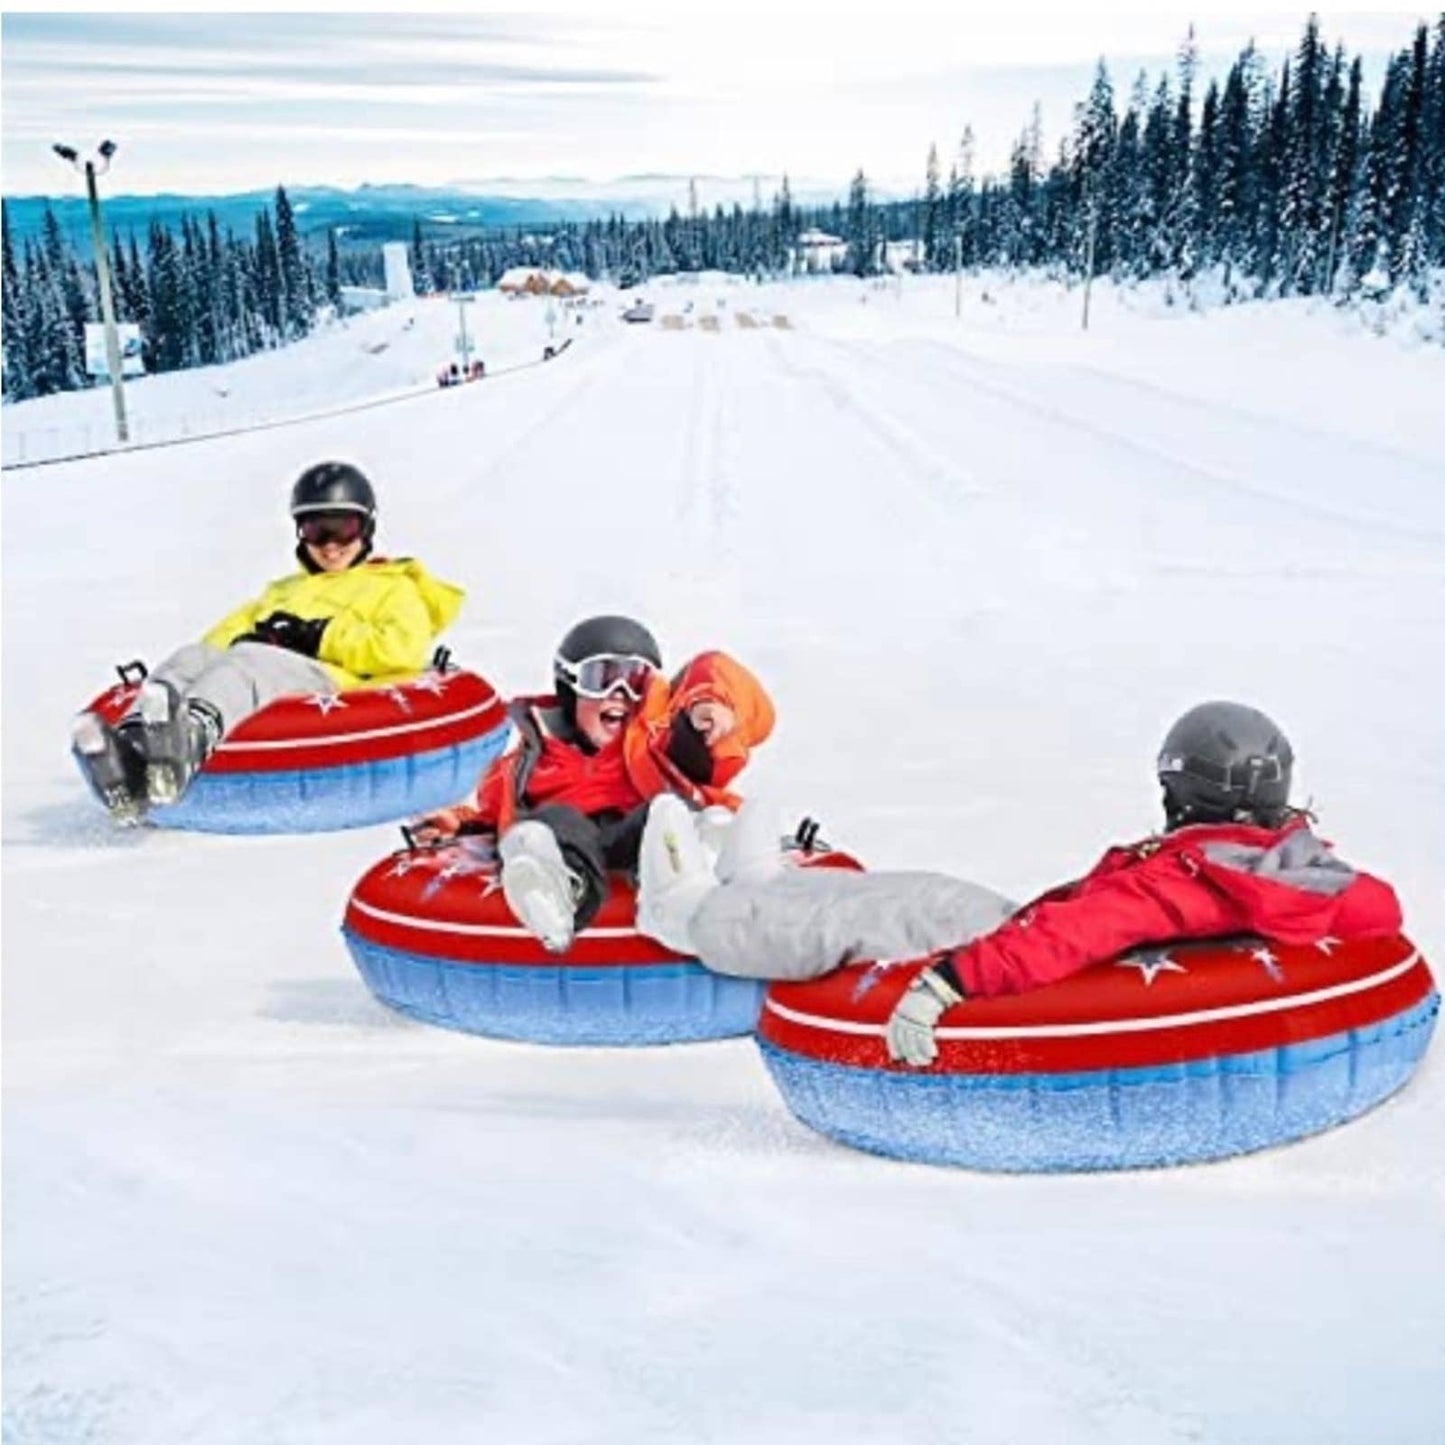 COMMOUDS Snow Tube, 47 Inch Large Inflatable Snow Sled with Handles Double-Layer